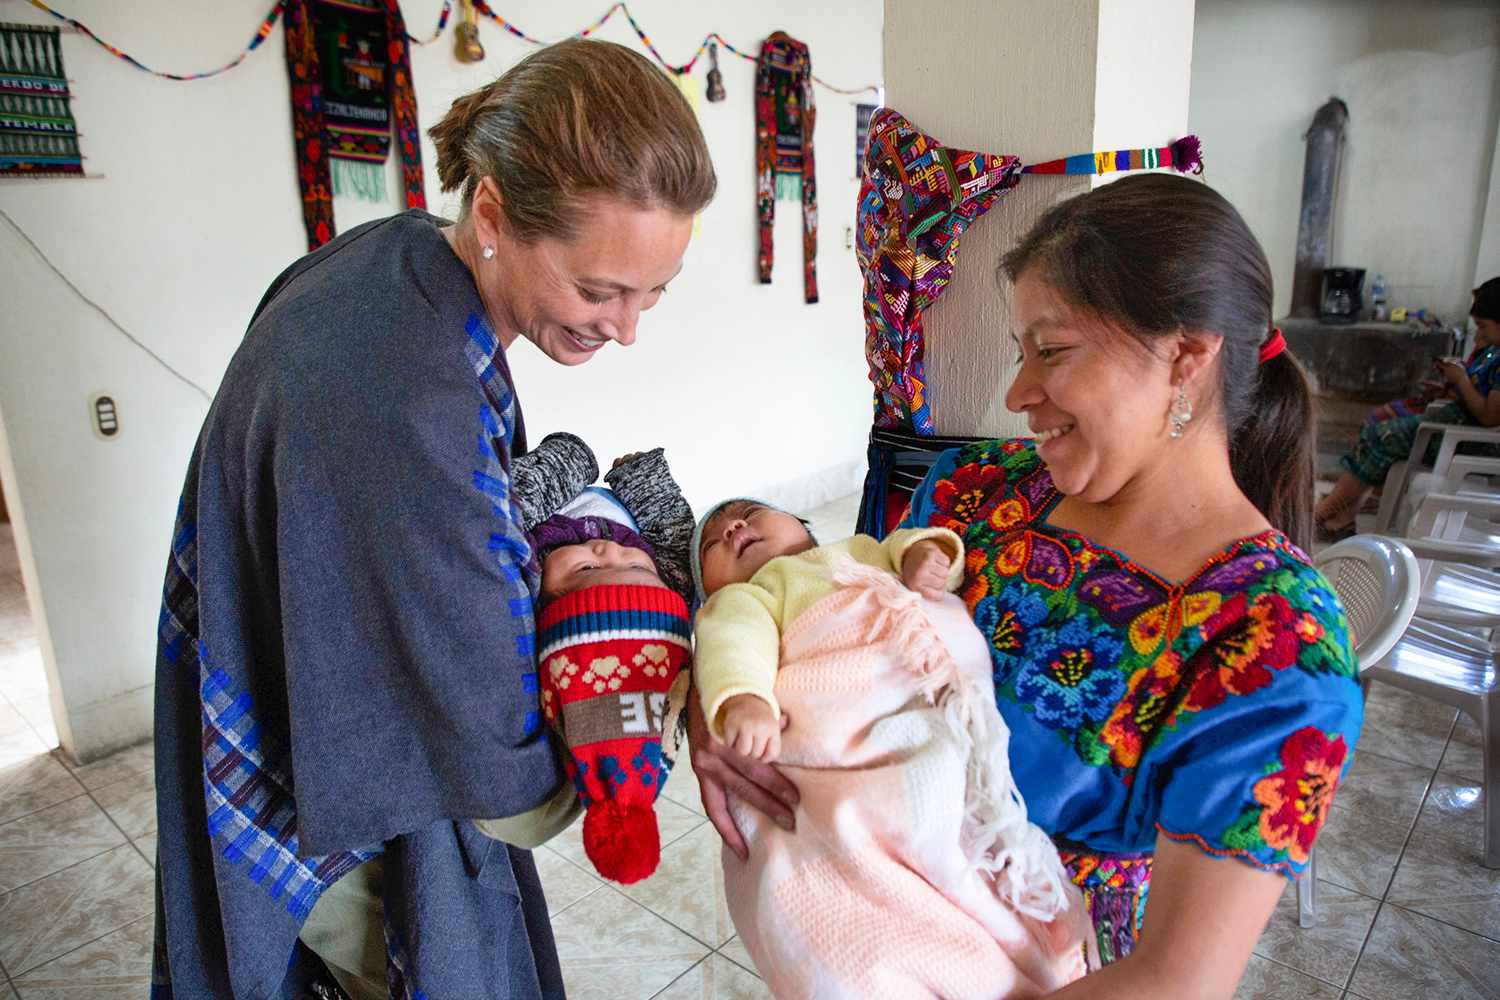 Christy Turlington Burns and a traditional midwife hold babies in Guatemala, 2019